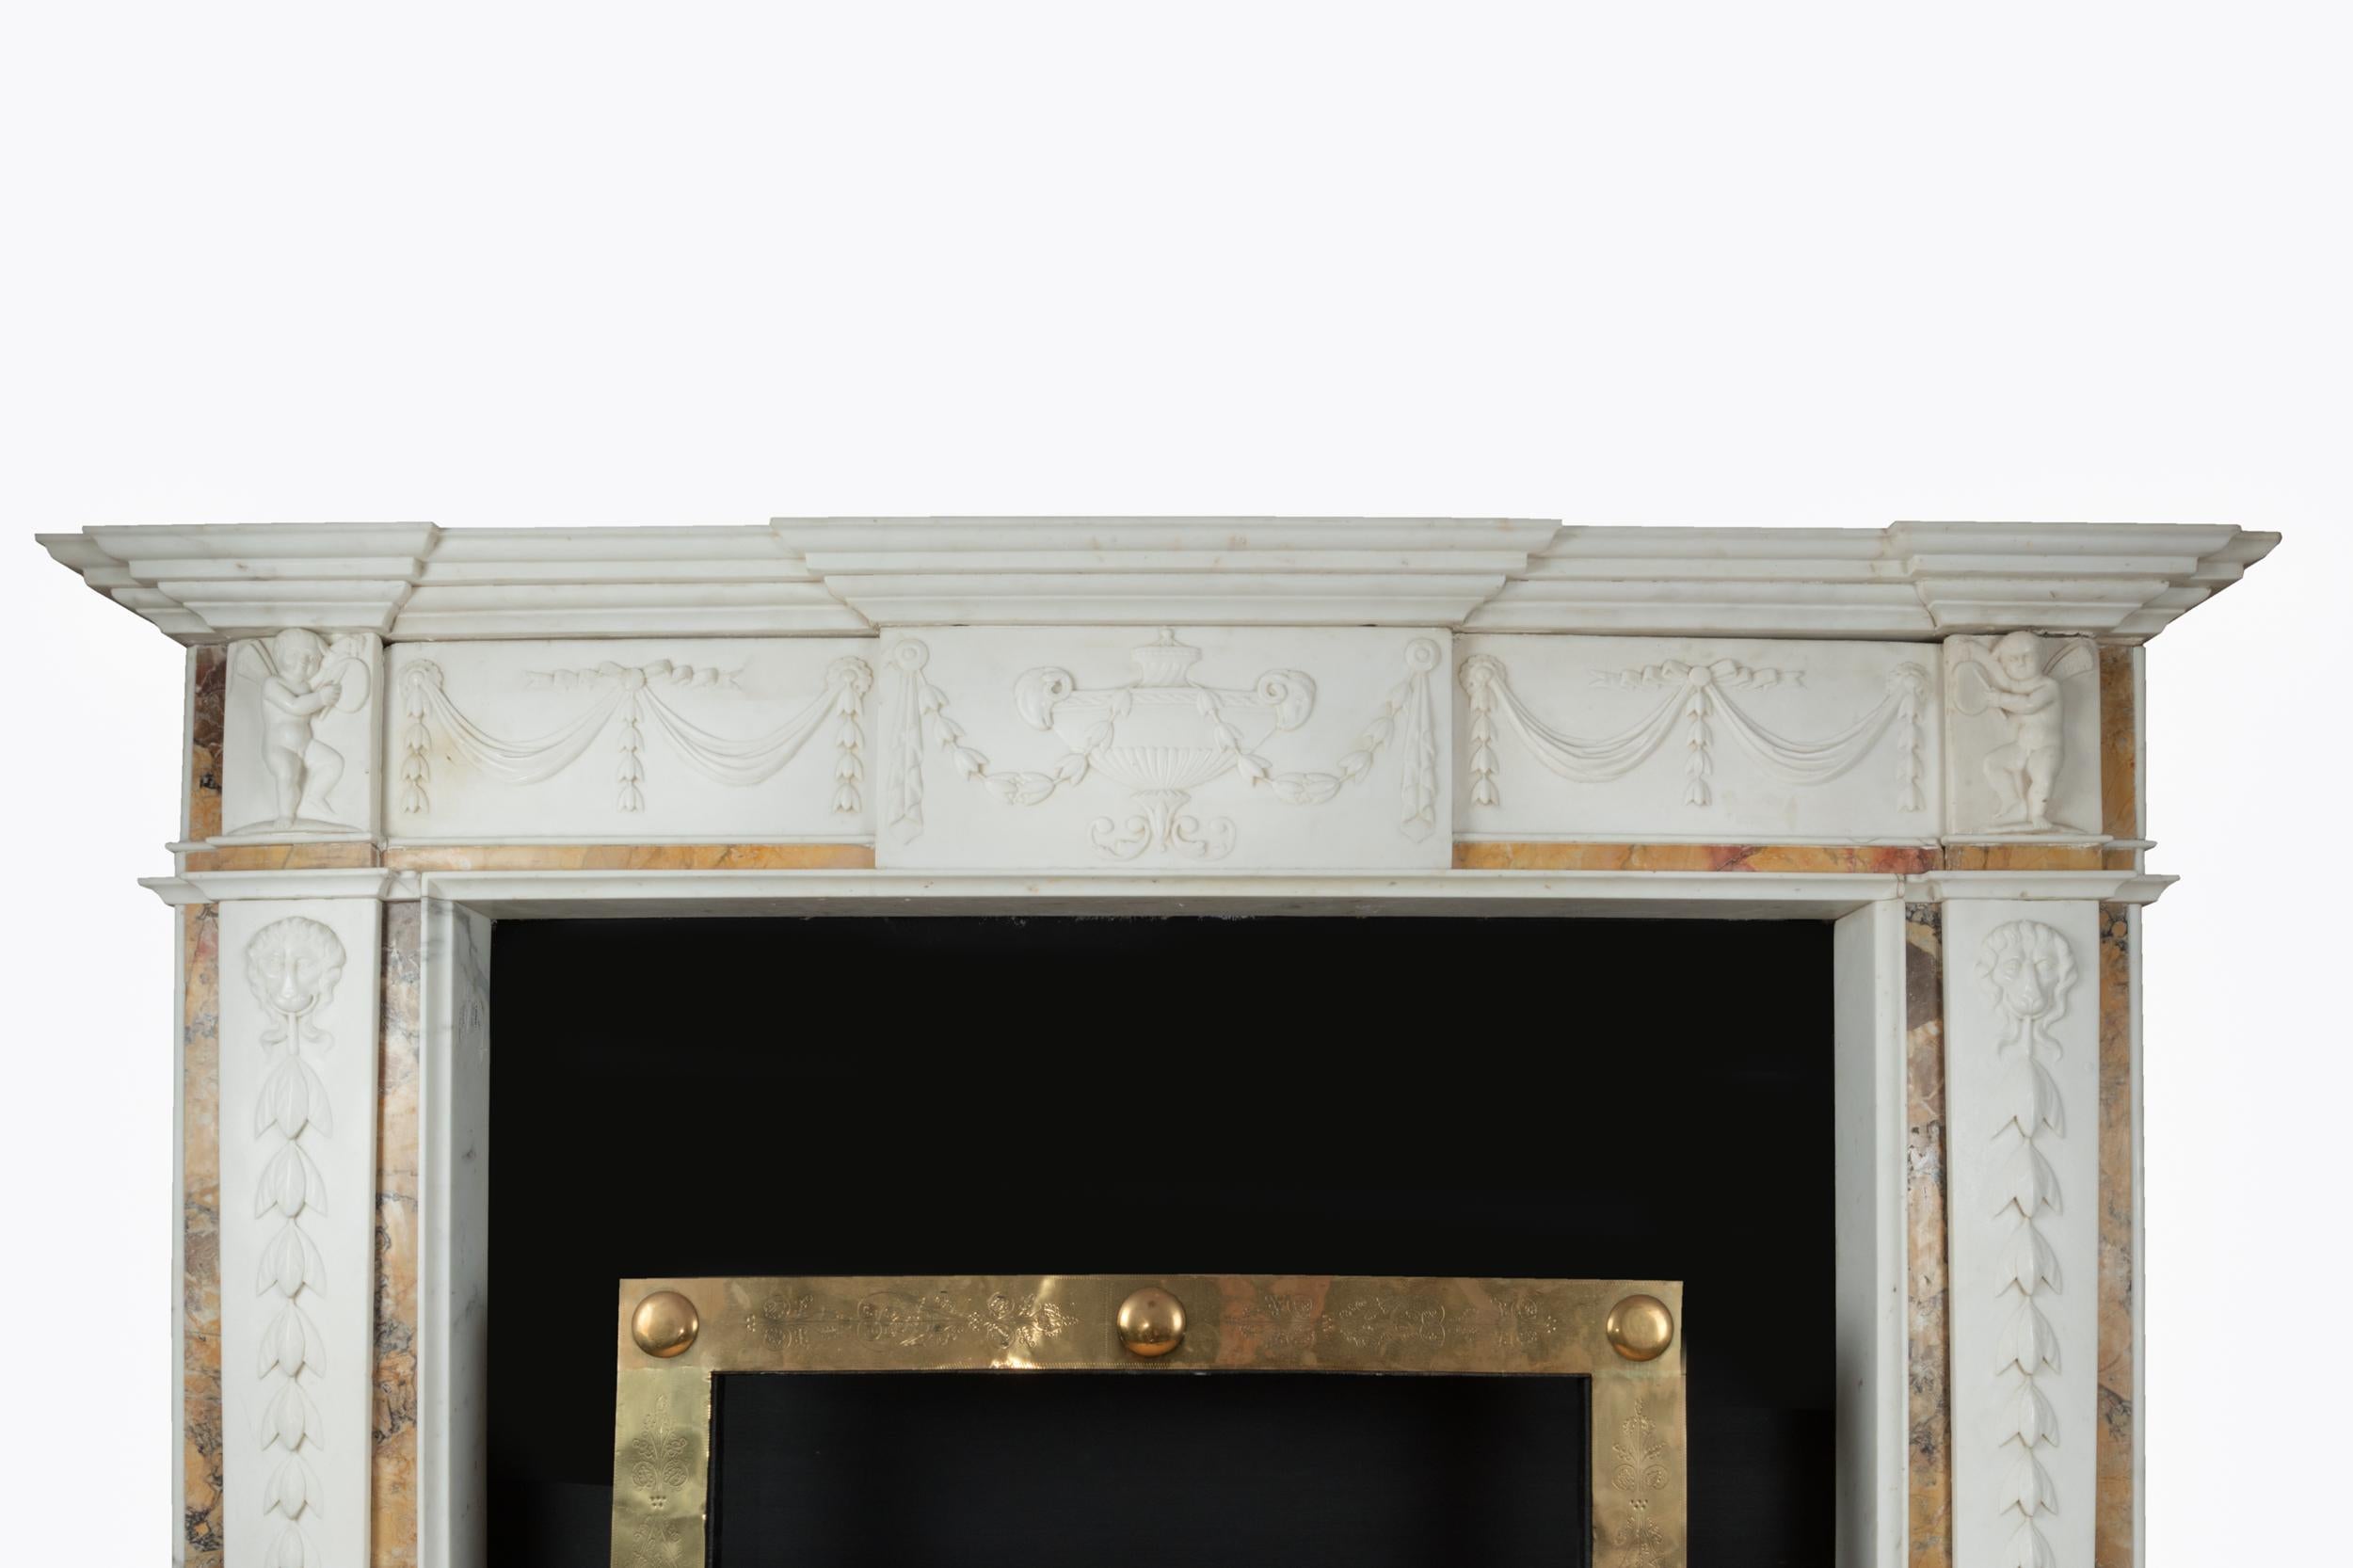 A heavily decorated chimneypiece of white statuary and sienna marble. The central tablet is sculpted with very a finely carved urn flanked with ram’s heads, drapery and foliage which epitomizes the refinement and elegance Adam brought to his work.